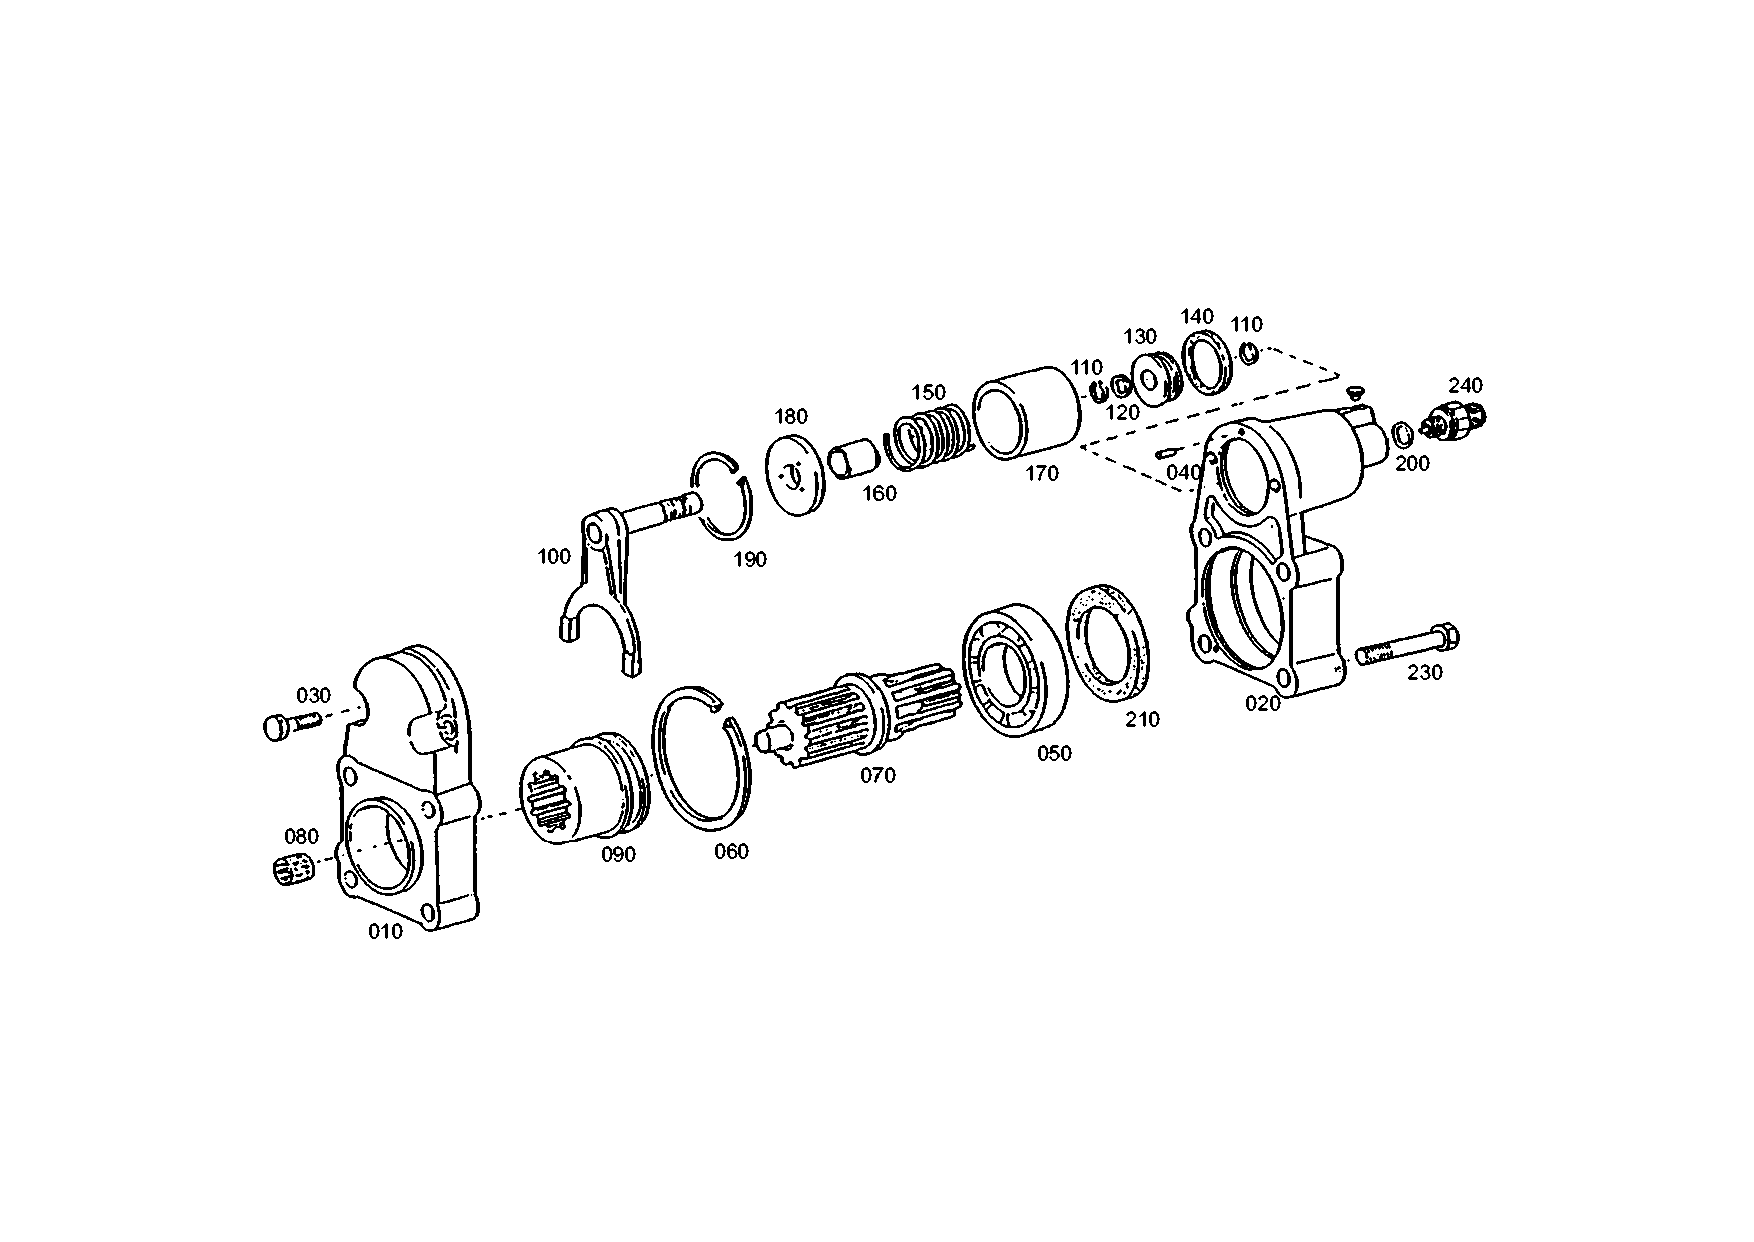 drawing for LUNA EQUIPOS INDUSTRIEALES, S.A. 199014250123 - WASHER (figure 4)